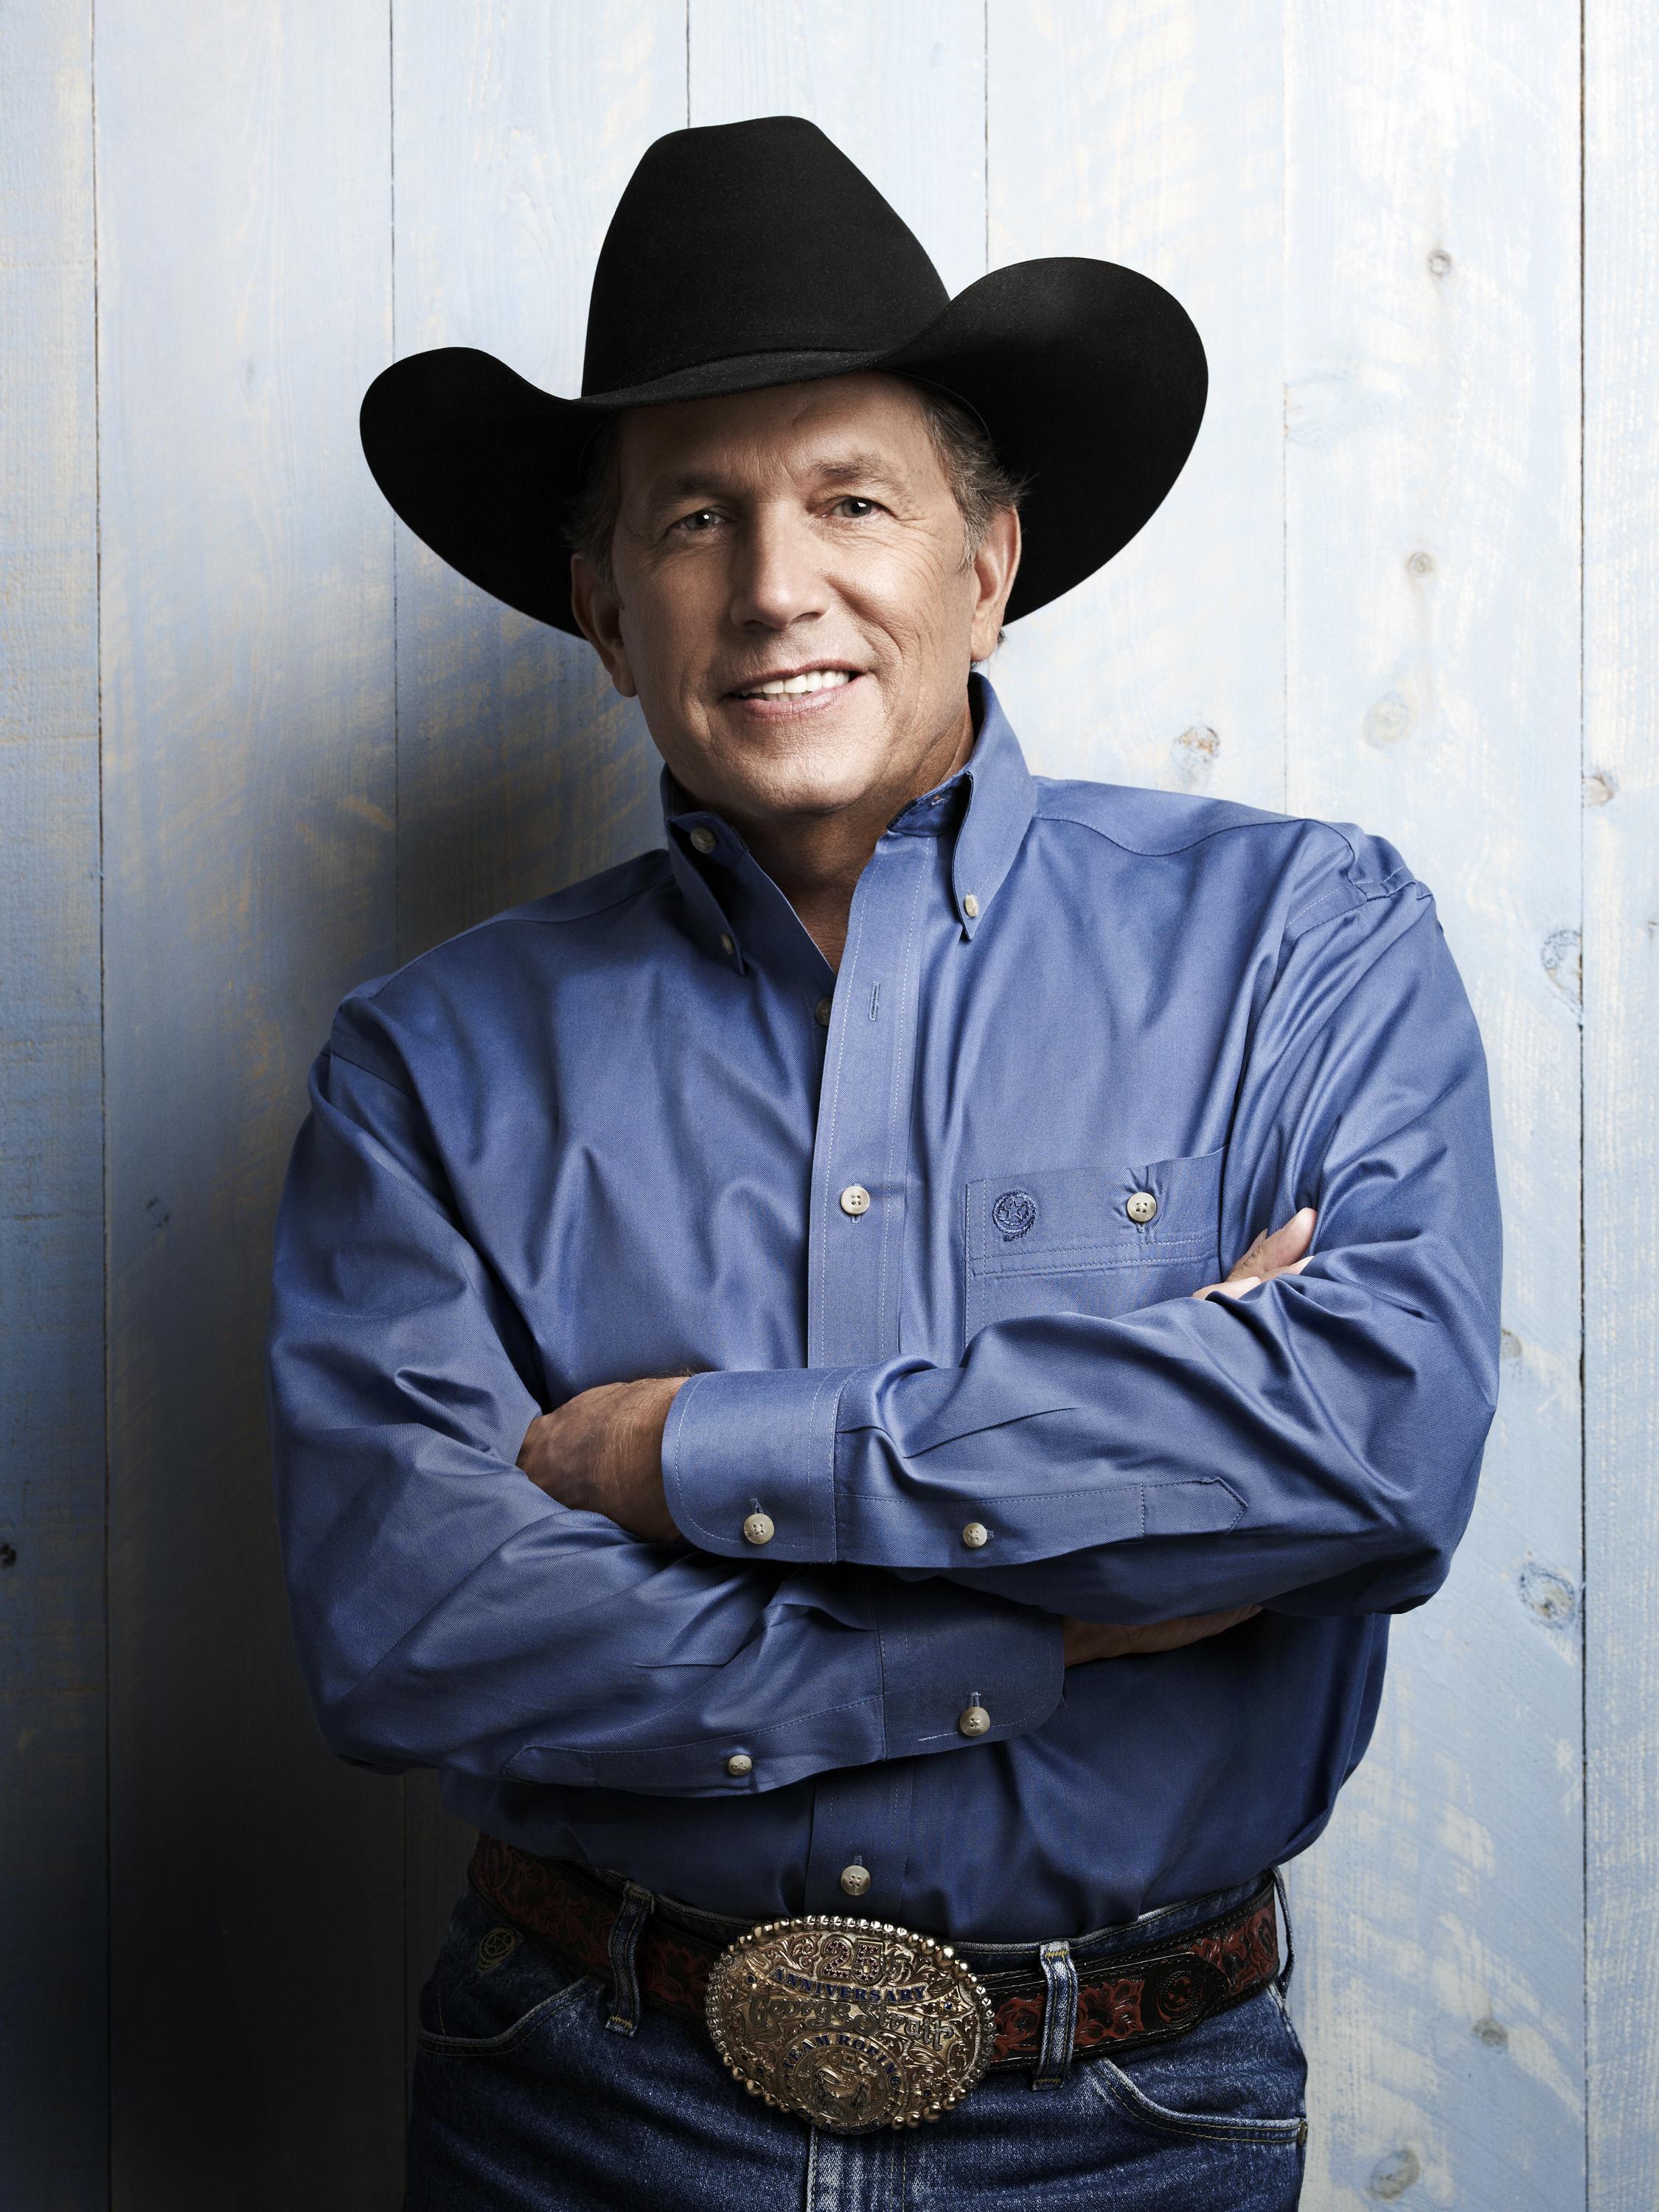 HD wallpaper country countrywestern george george strait  Wallpaper  Flare